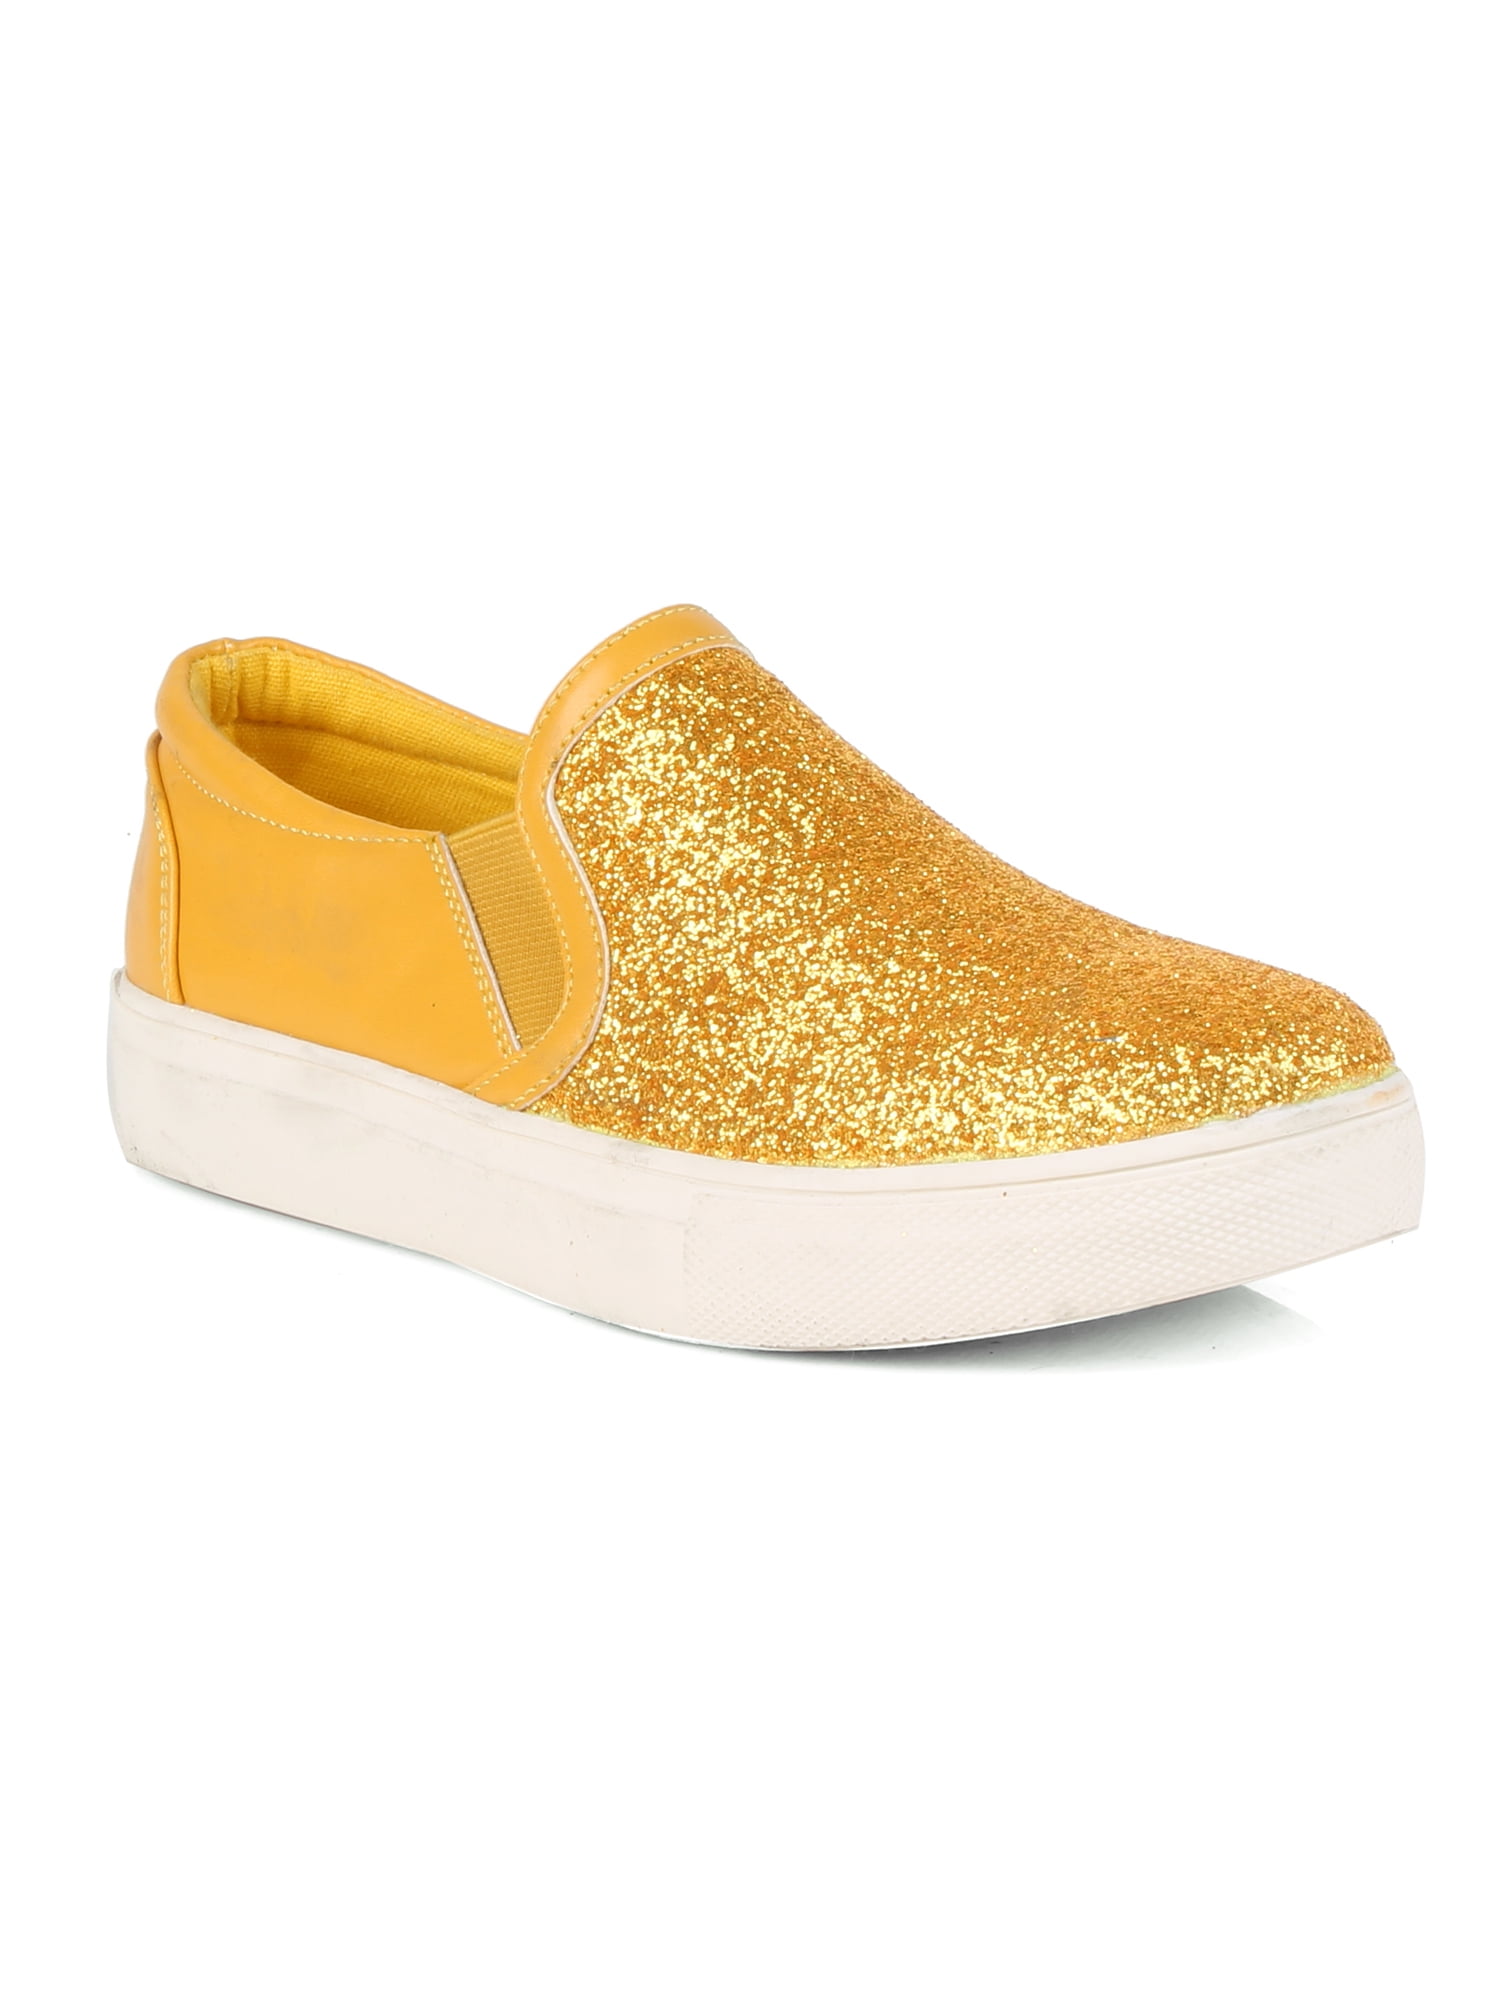 WOMENS LADIES FLAT GOLD ZIPS CROC SLIP ON CASUAL PLIMSOLES TRAINERS SHOES SIZE 